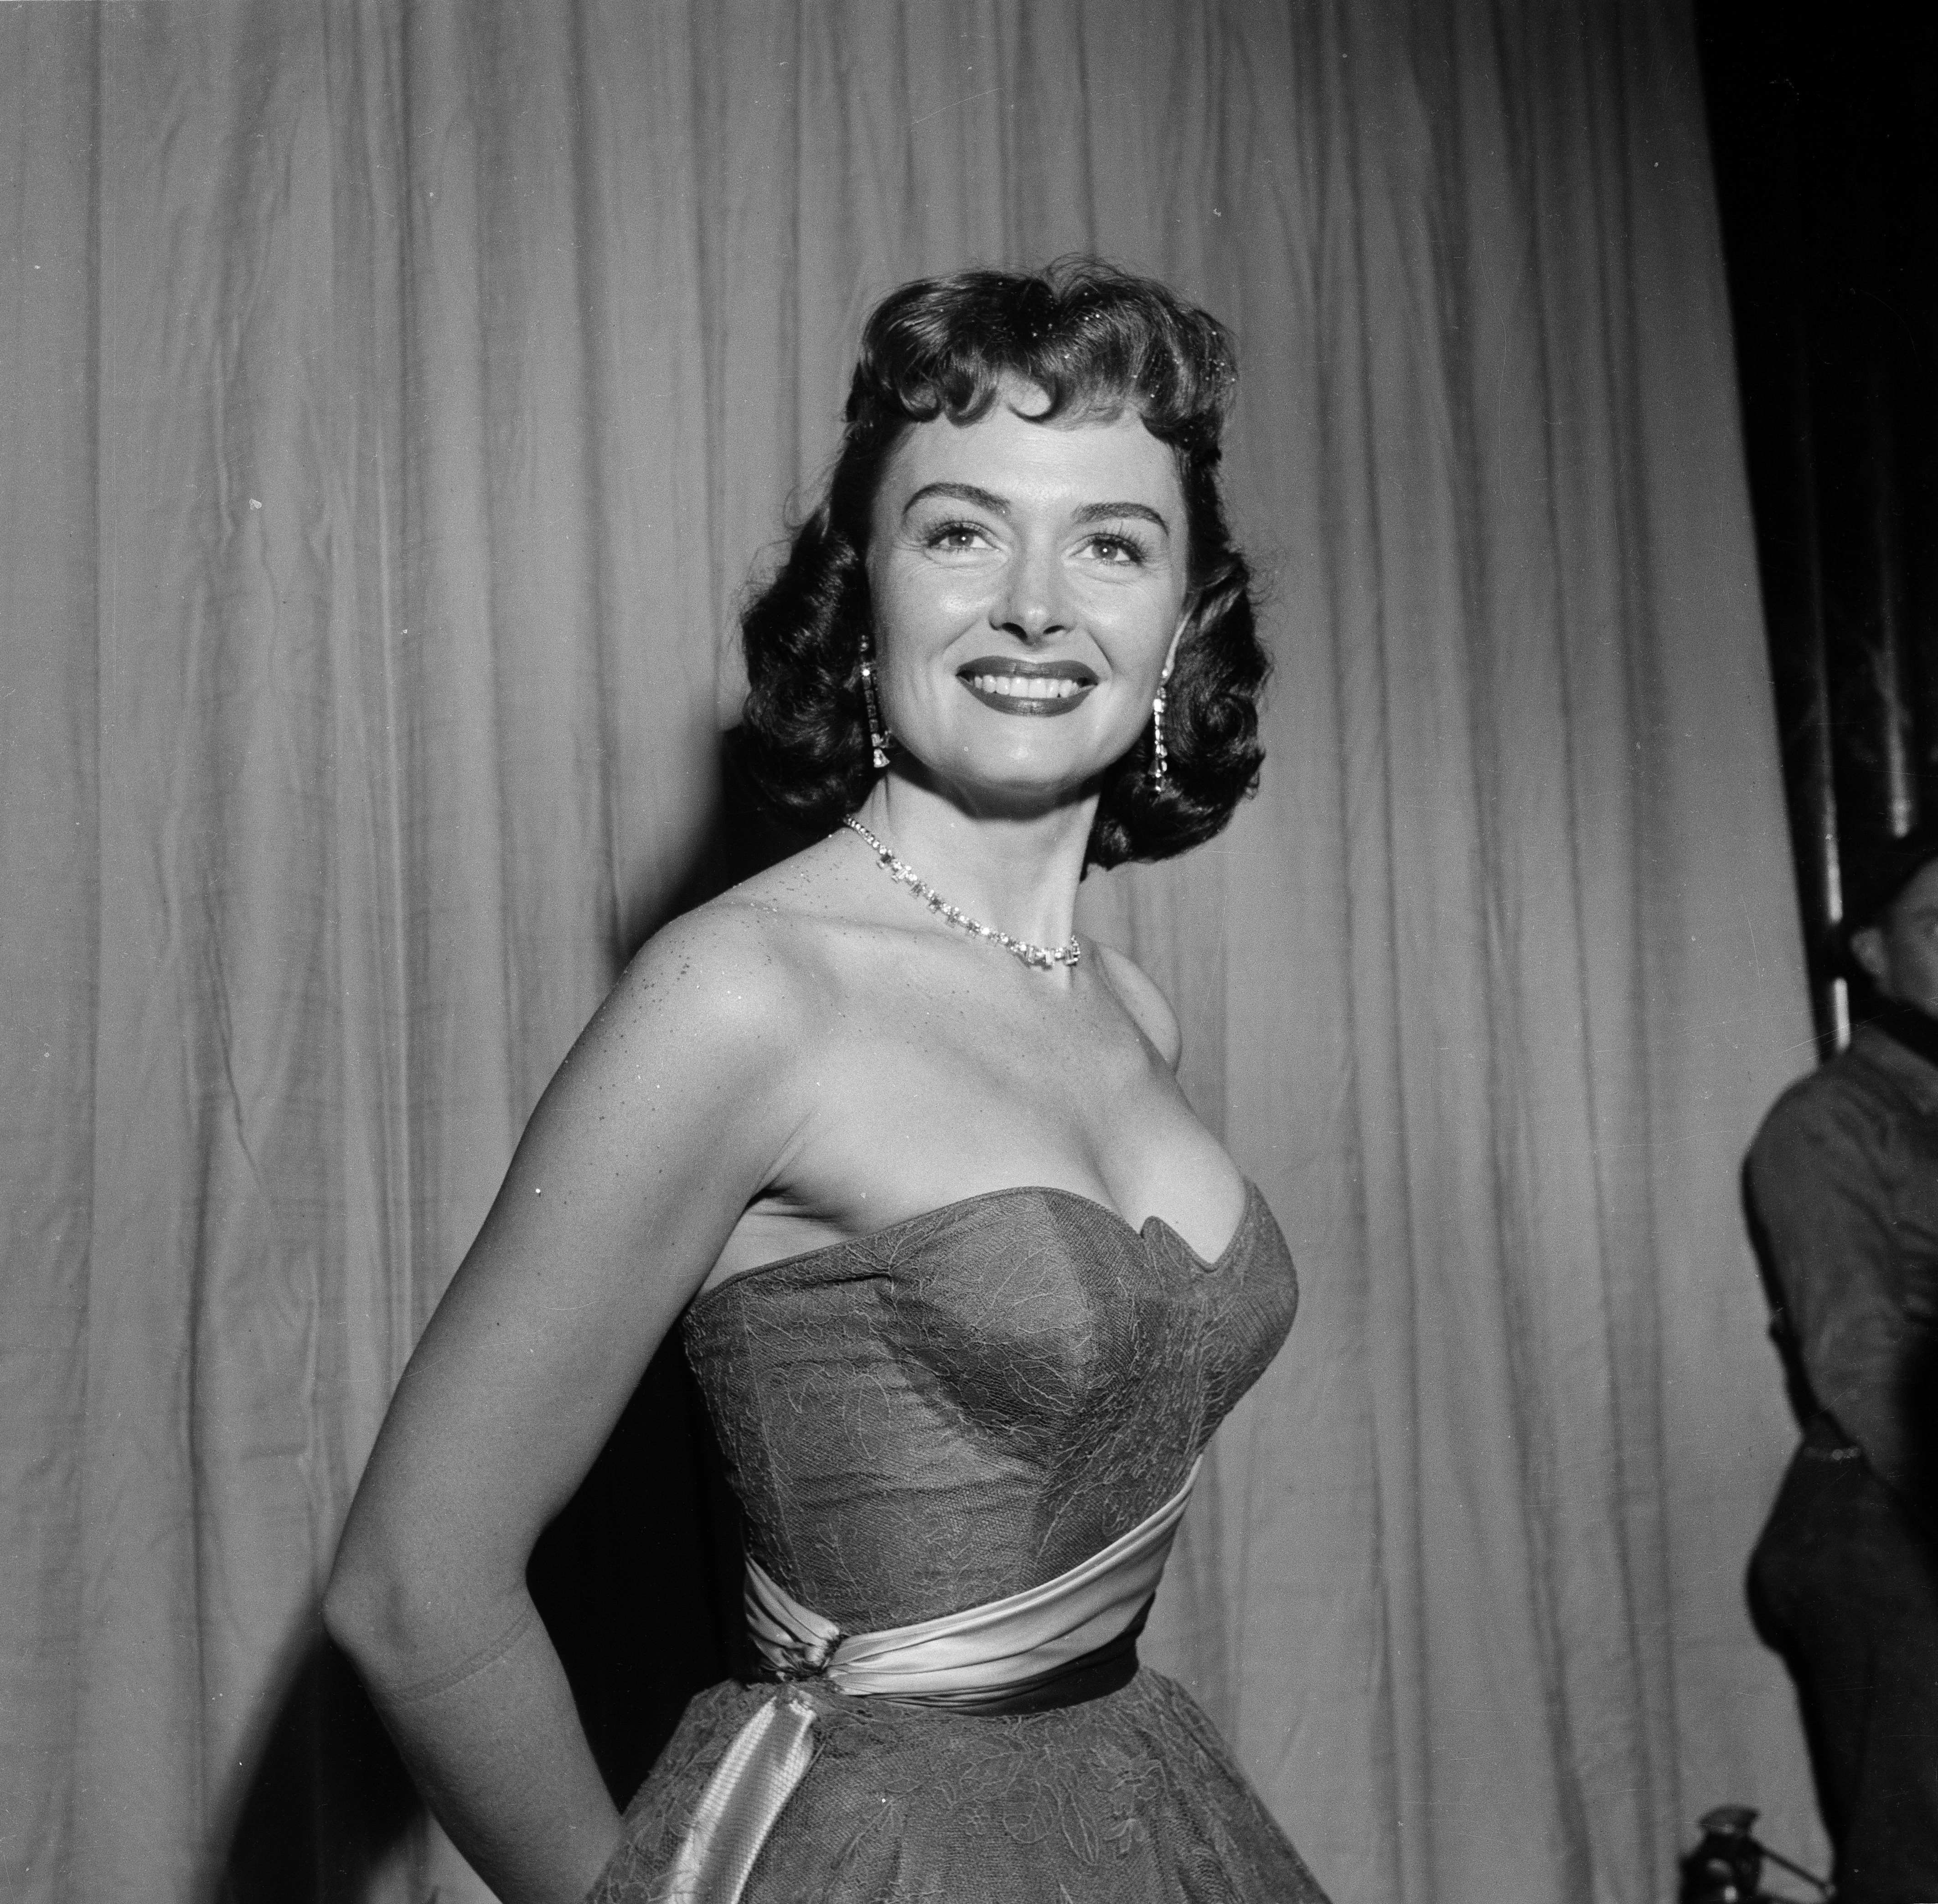 Actress Donna Reed poses at the Academy Award in Los Angeles, California, on March 25, 1954 | Source: Getty Images